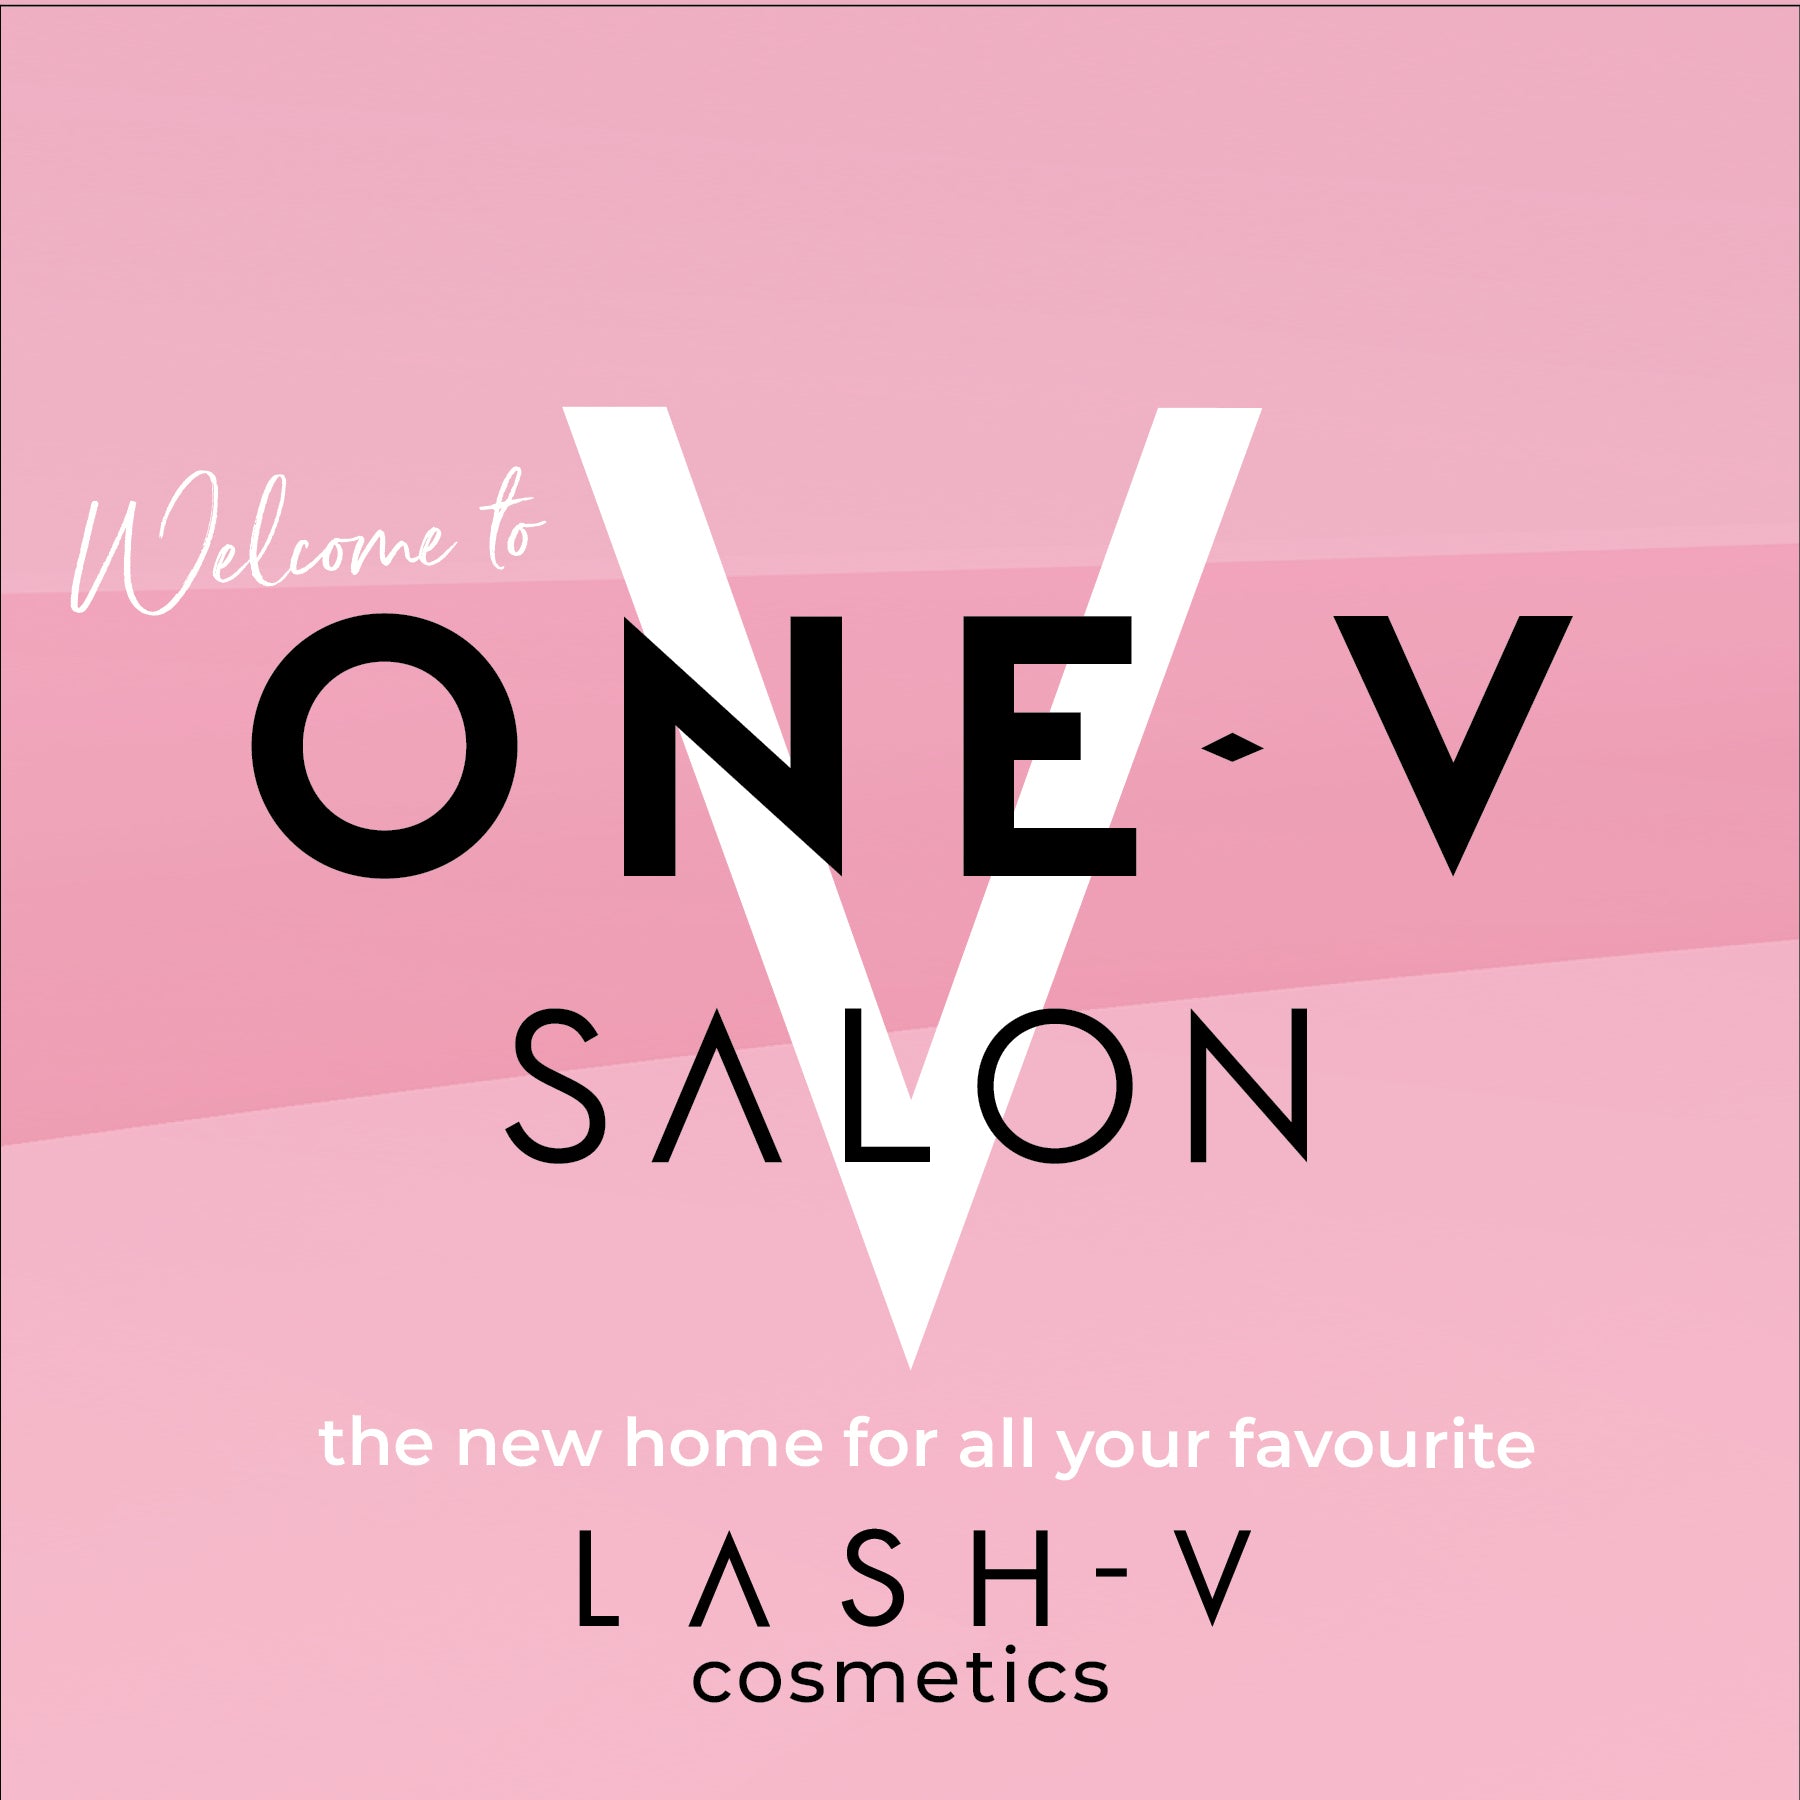 OneVsalon your new home for Lash V Cosmetics